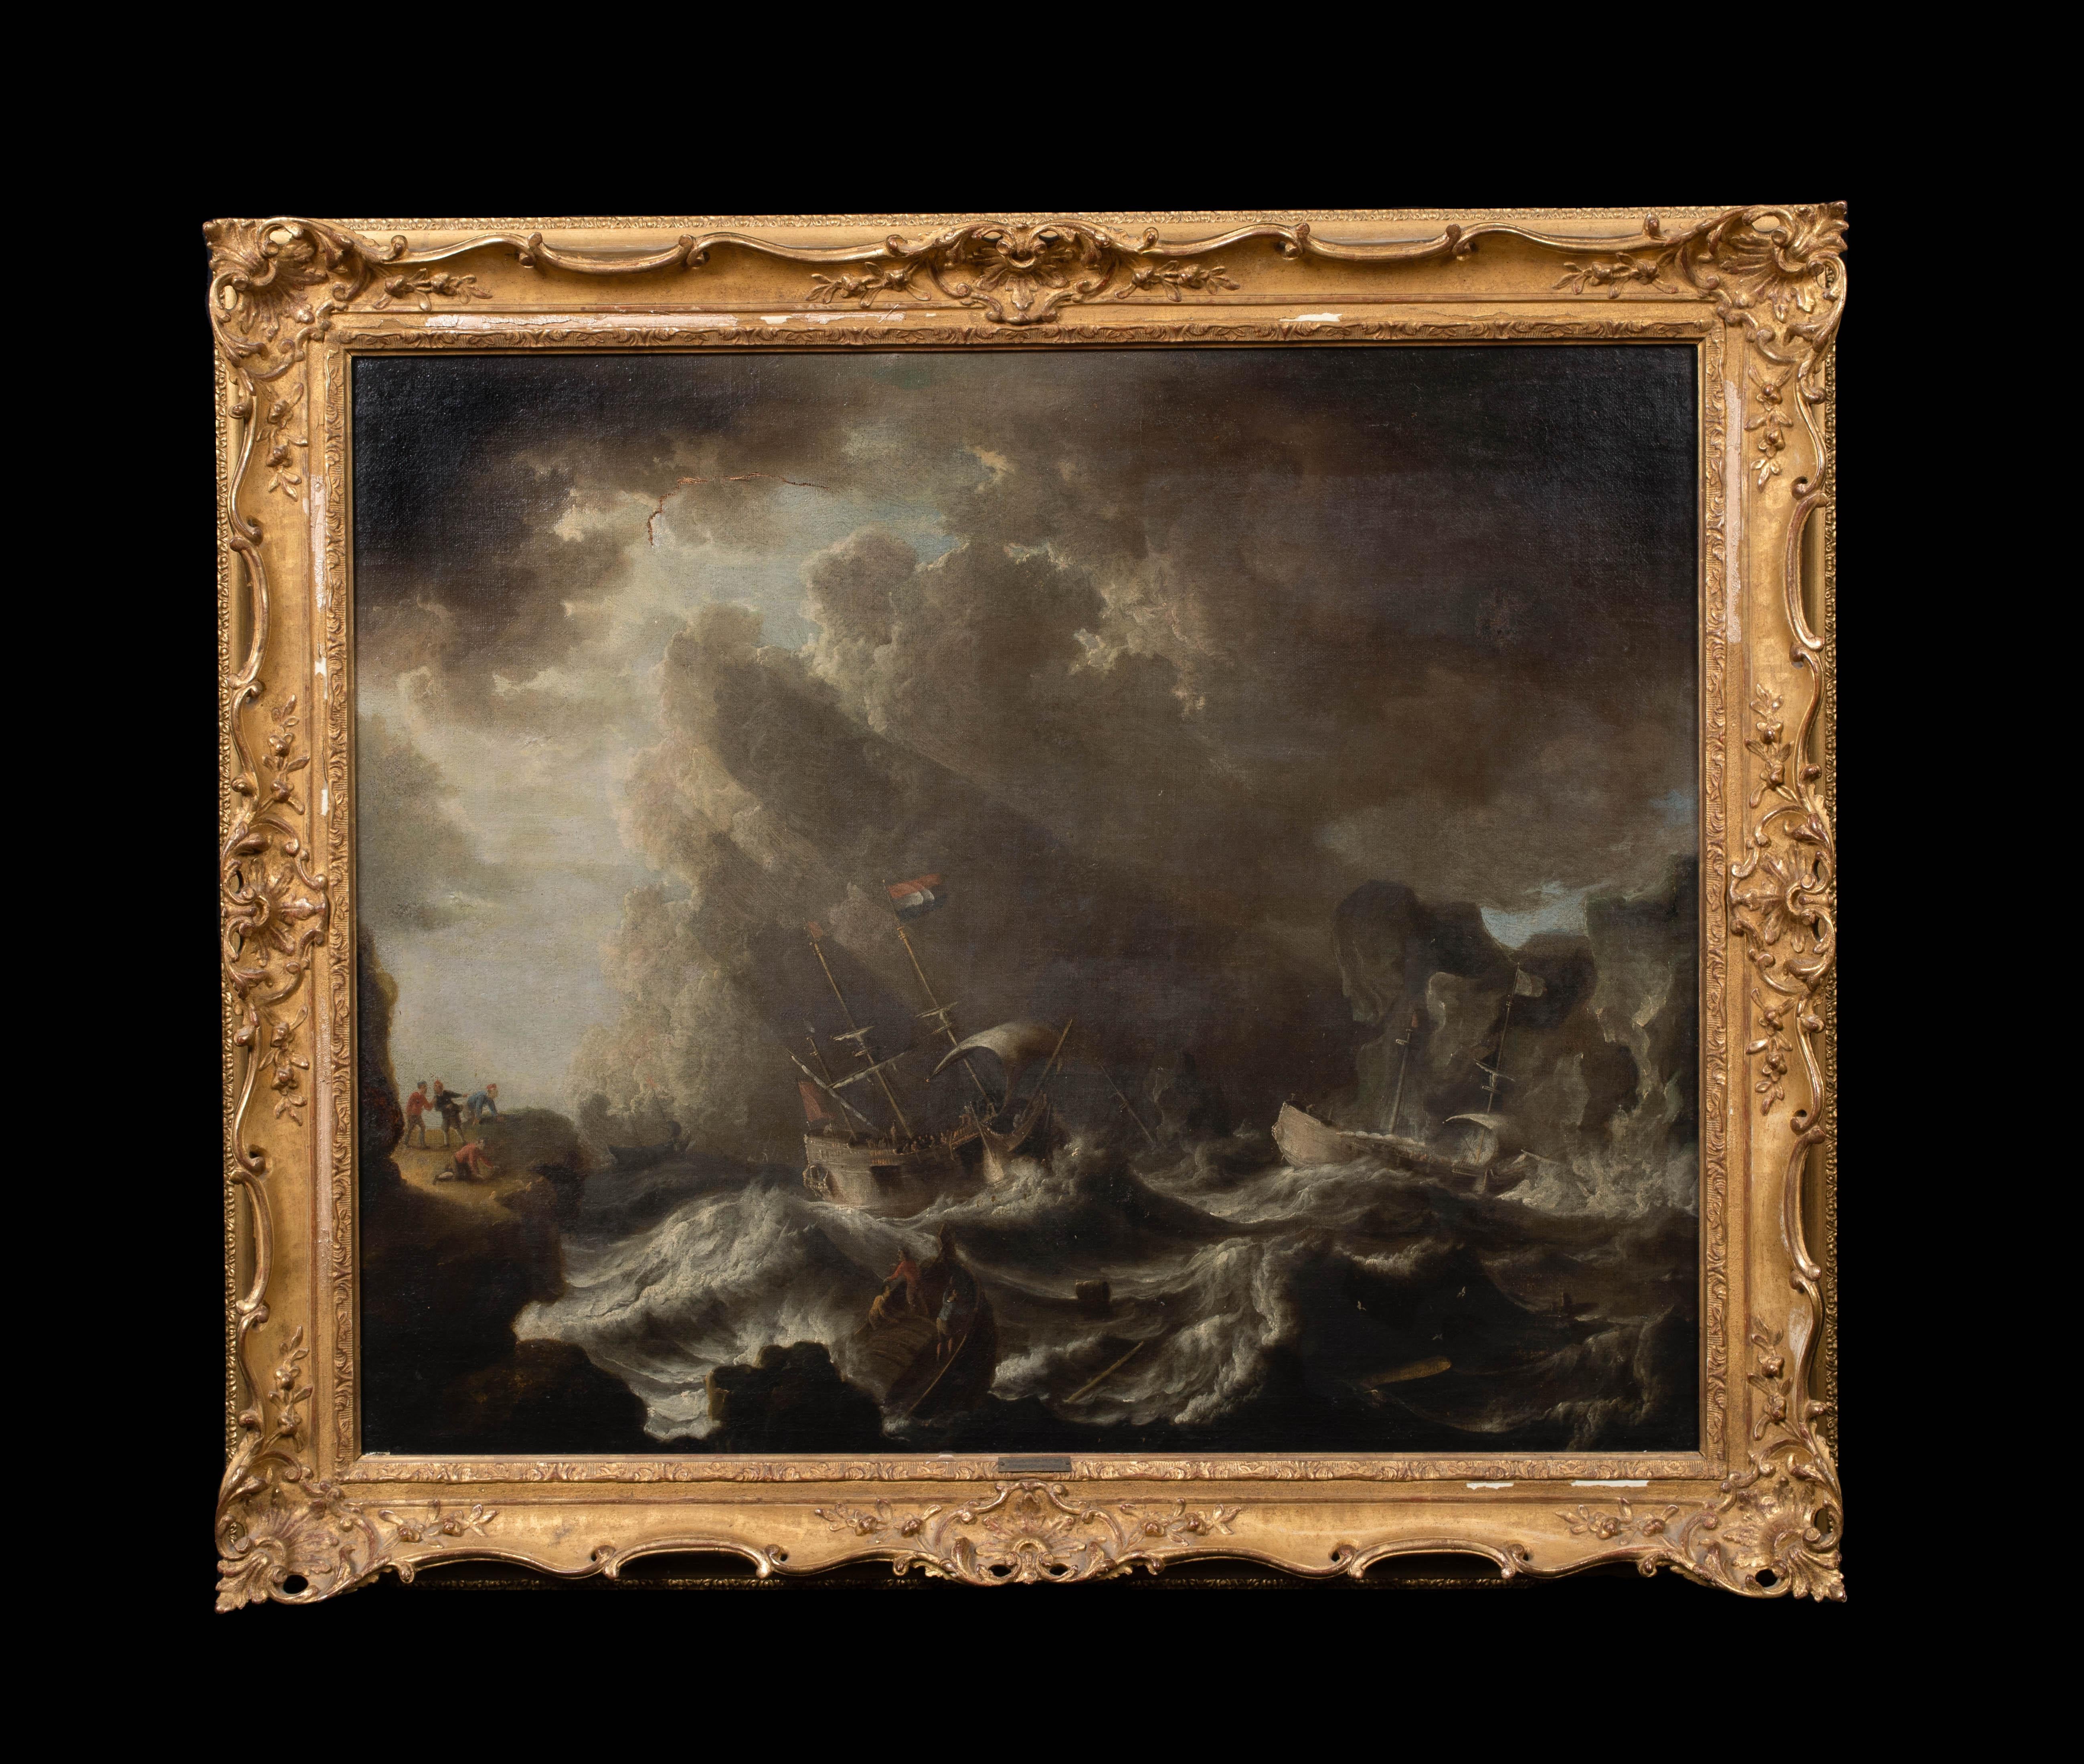 The Storm, 17th Century

by Bonaventura Peeters (1614-1652) 

Large 17th Century Dutch Old Master depiction of Naval and fishing ships caught in a storm off a rocky coast, oil on canvas by Bonaventura Peeters. Excellent quality, early and important